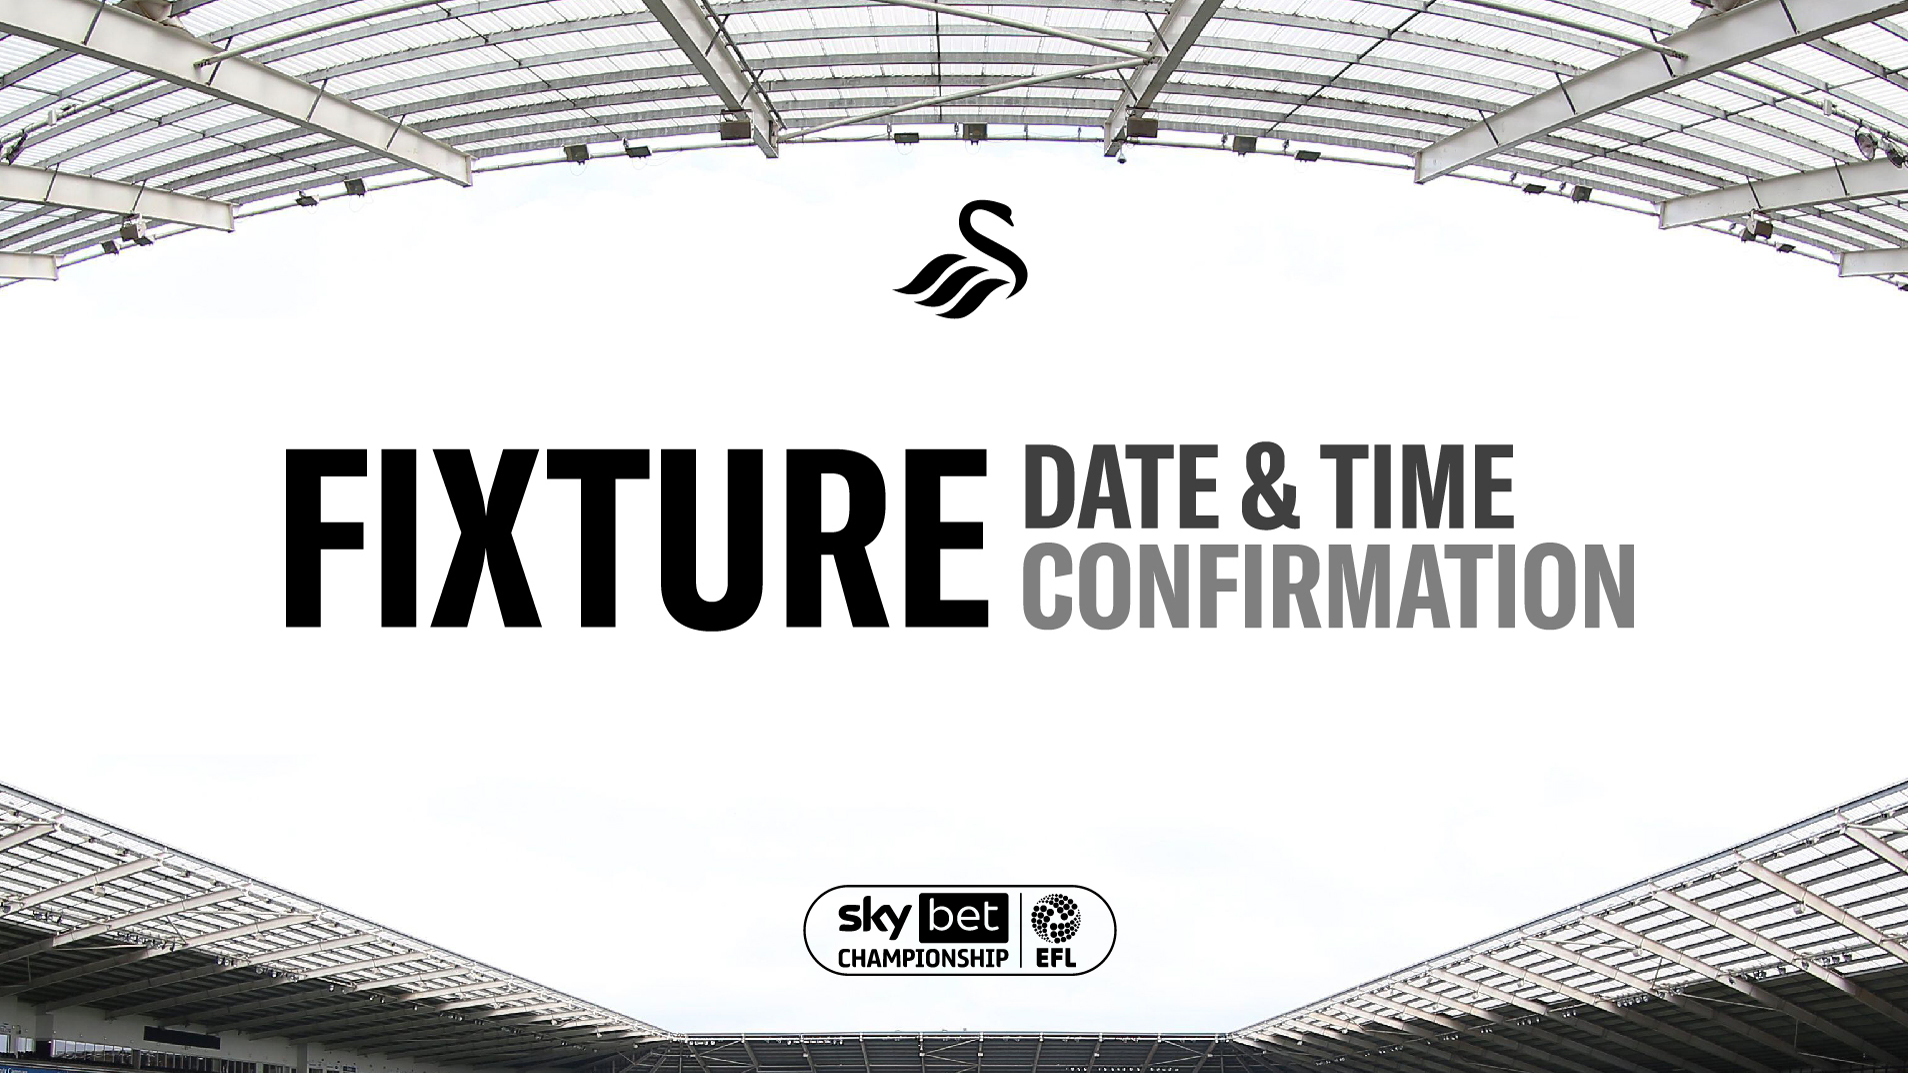 Fixture confirmation graphic